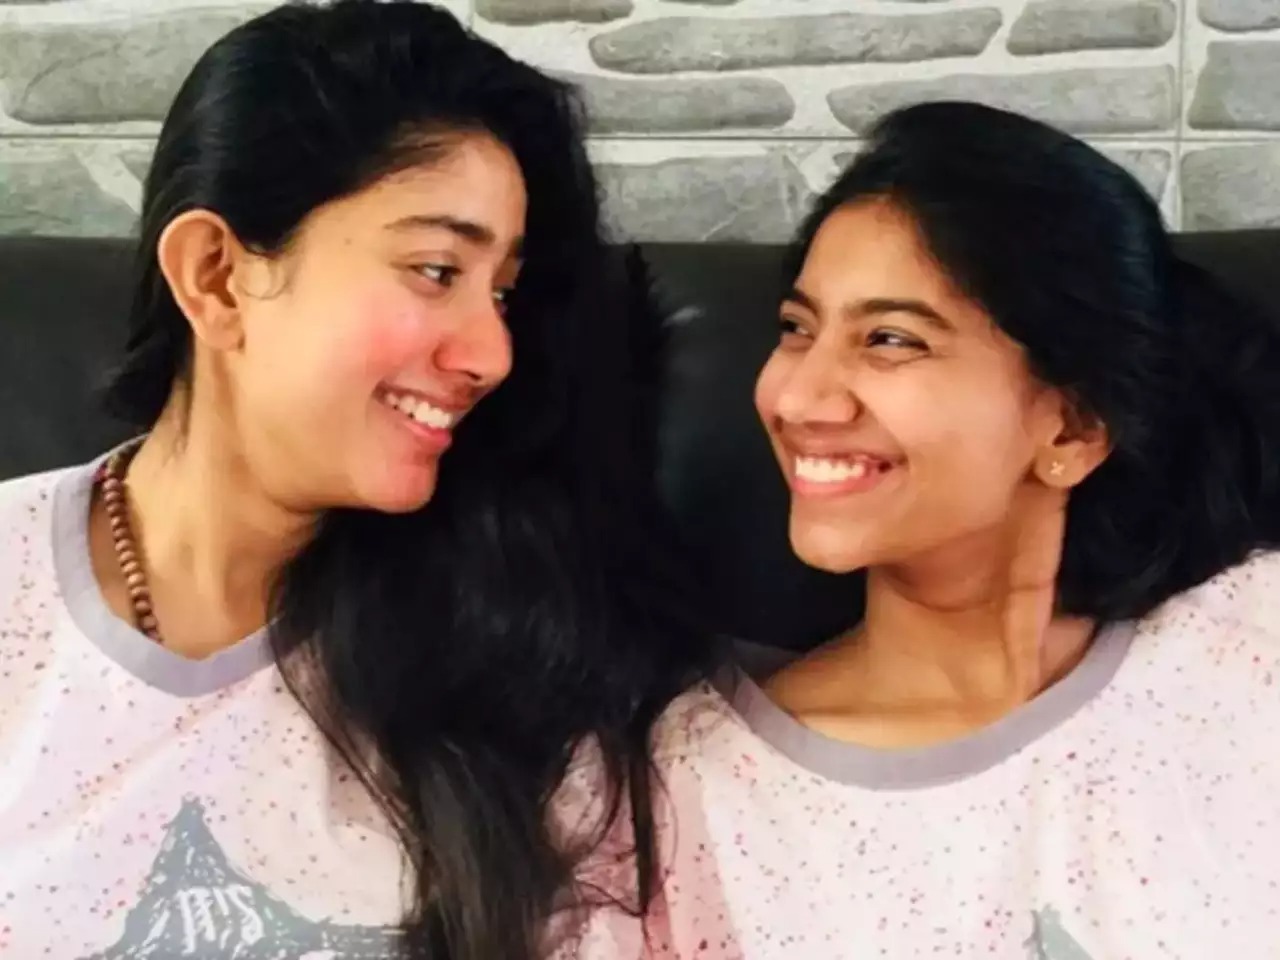 Saipallavi younger sister who begged the celebrity about rumours on social media